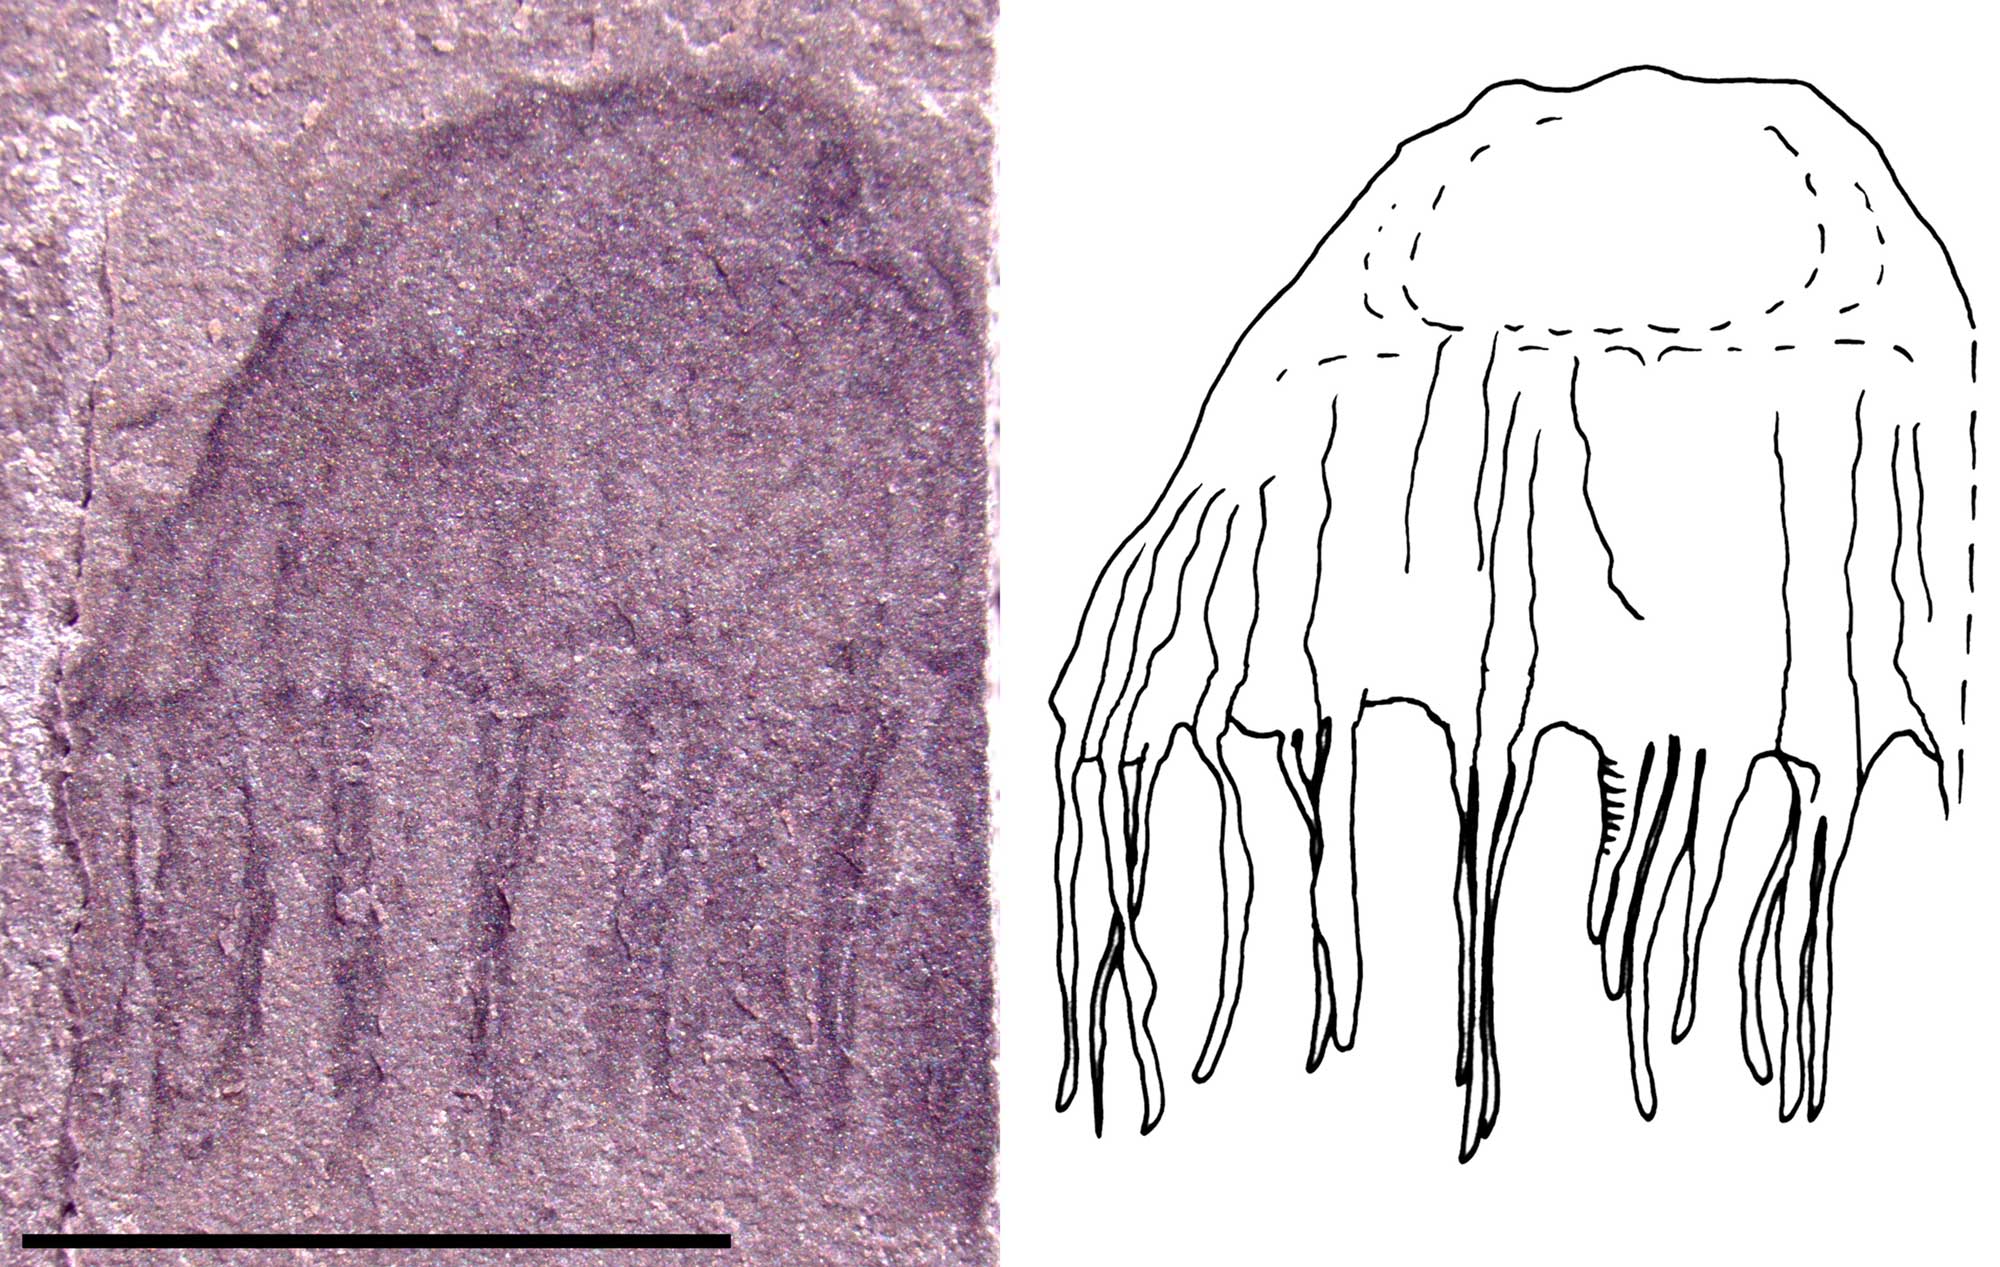 2-panel figure of a fossil jellyfish from the Cambrian of Utah. Panel 1: Photograph of a single specimen with a half-circle-shaped upper part and numerous short, narrow tentacles hanging down. Right: Line drawing of the same specimen. Scale bar indicates that the specimen is less than 1 centimeter wide.